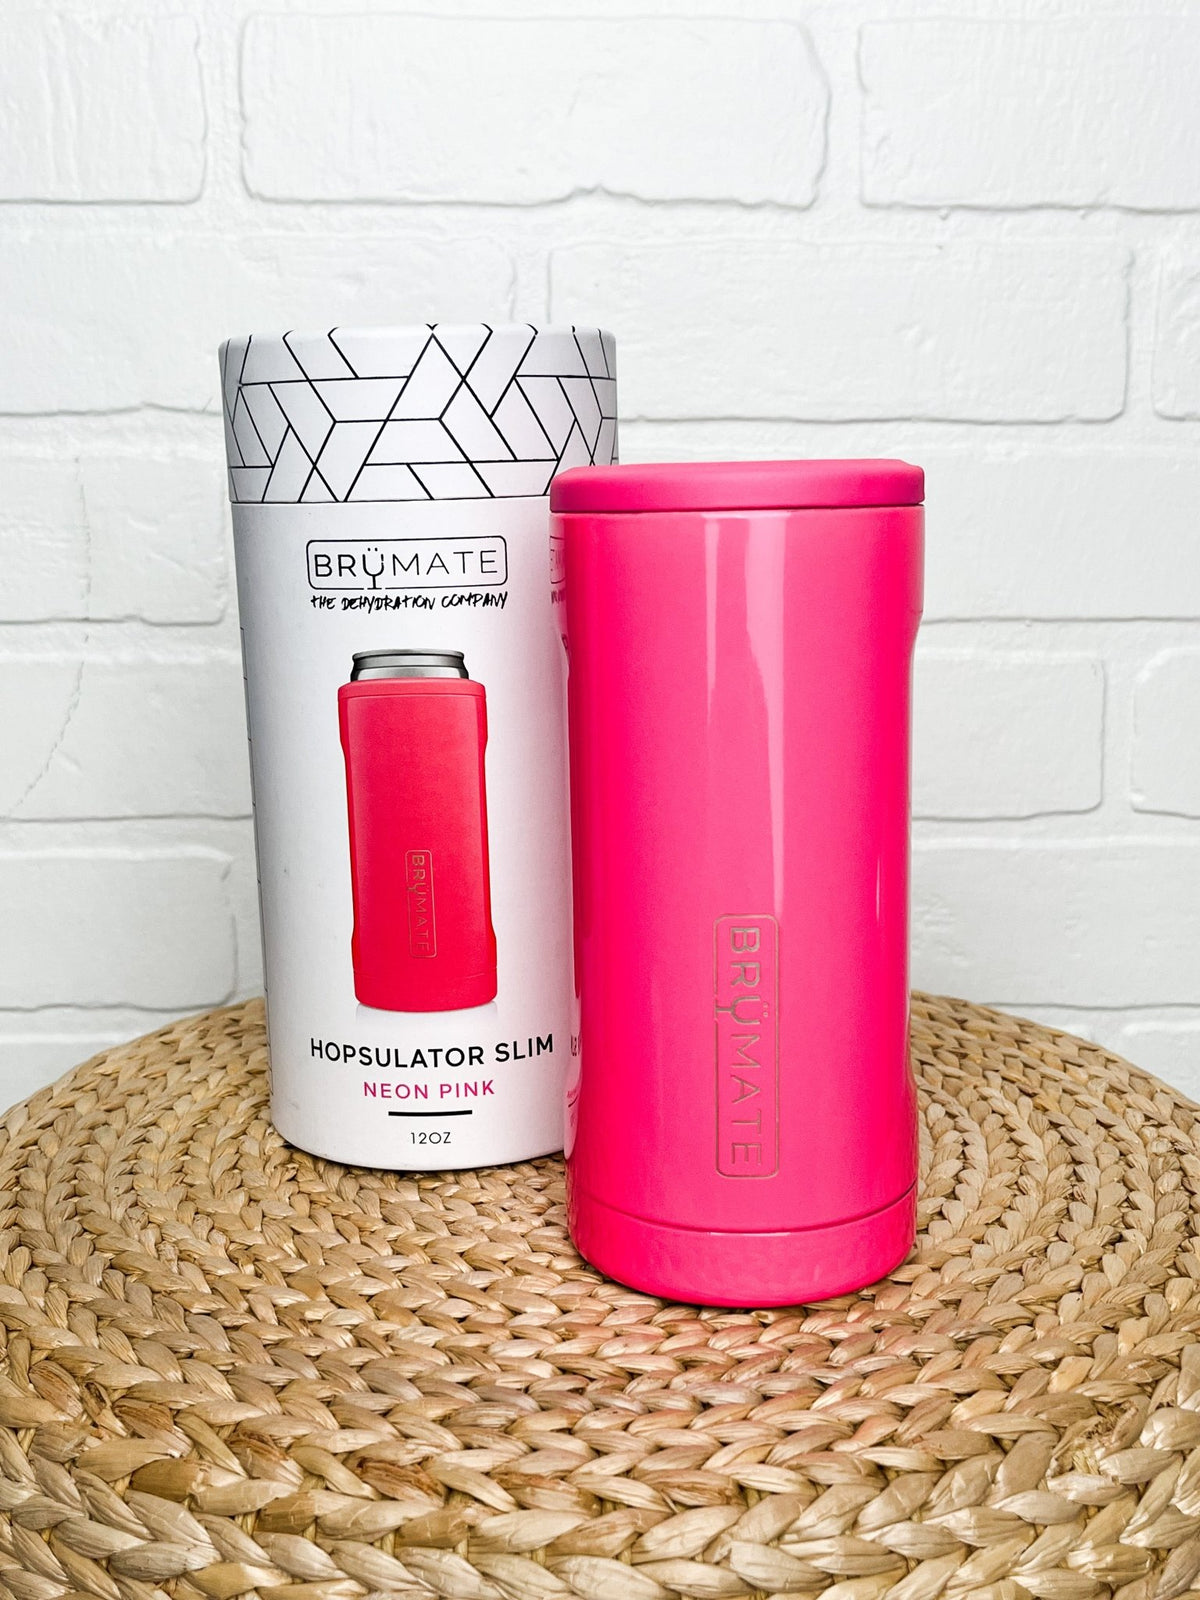 BruMate hopsulator slim neon pink - BruMate Drinkware, Tumblers and Insulated Can Coolers at Lush Fashion Lounge Trendy Boutique in Oklahoma City